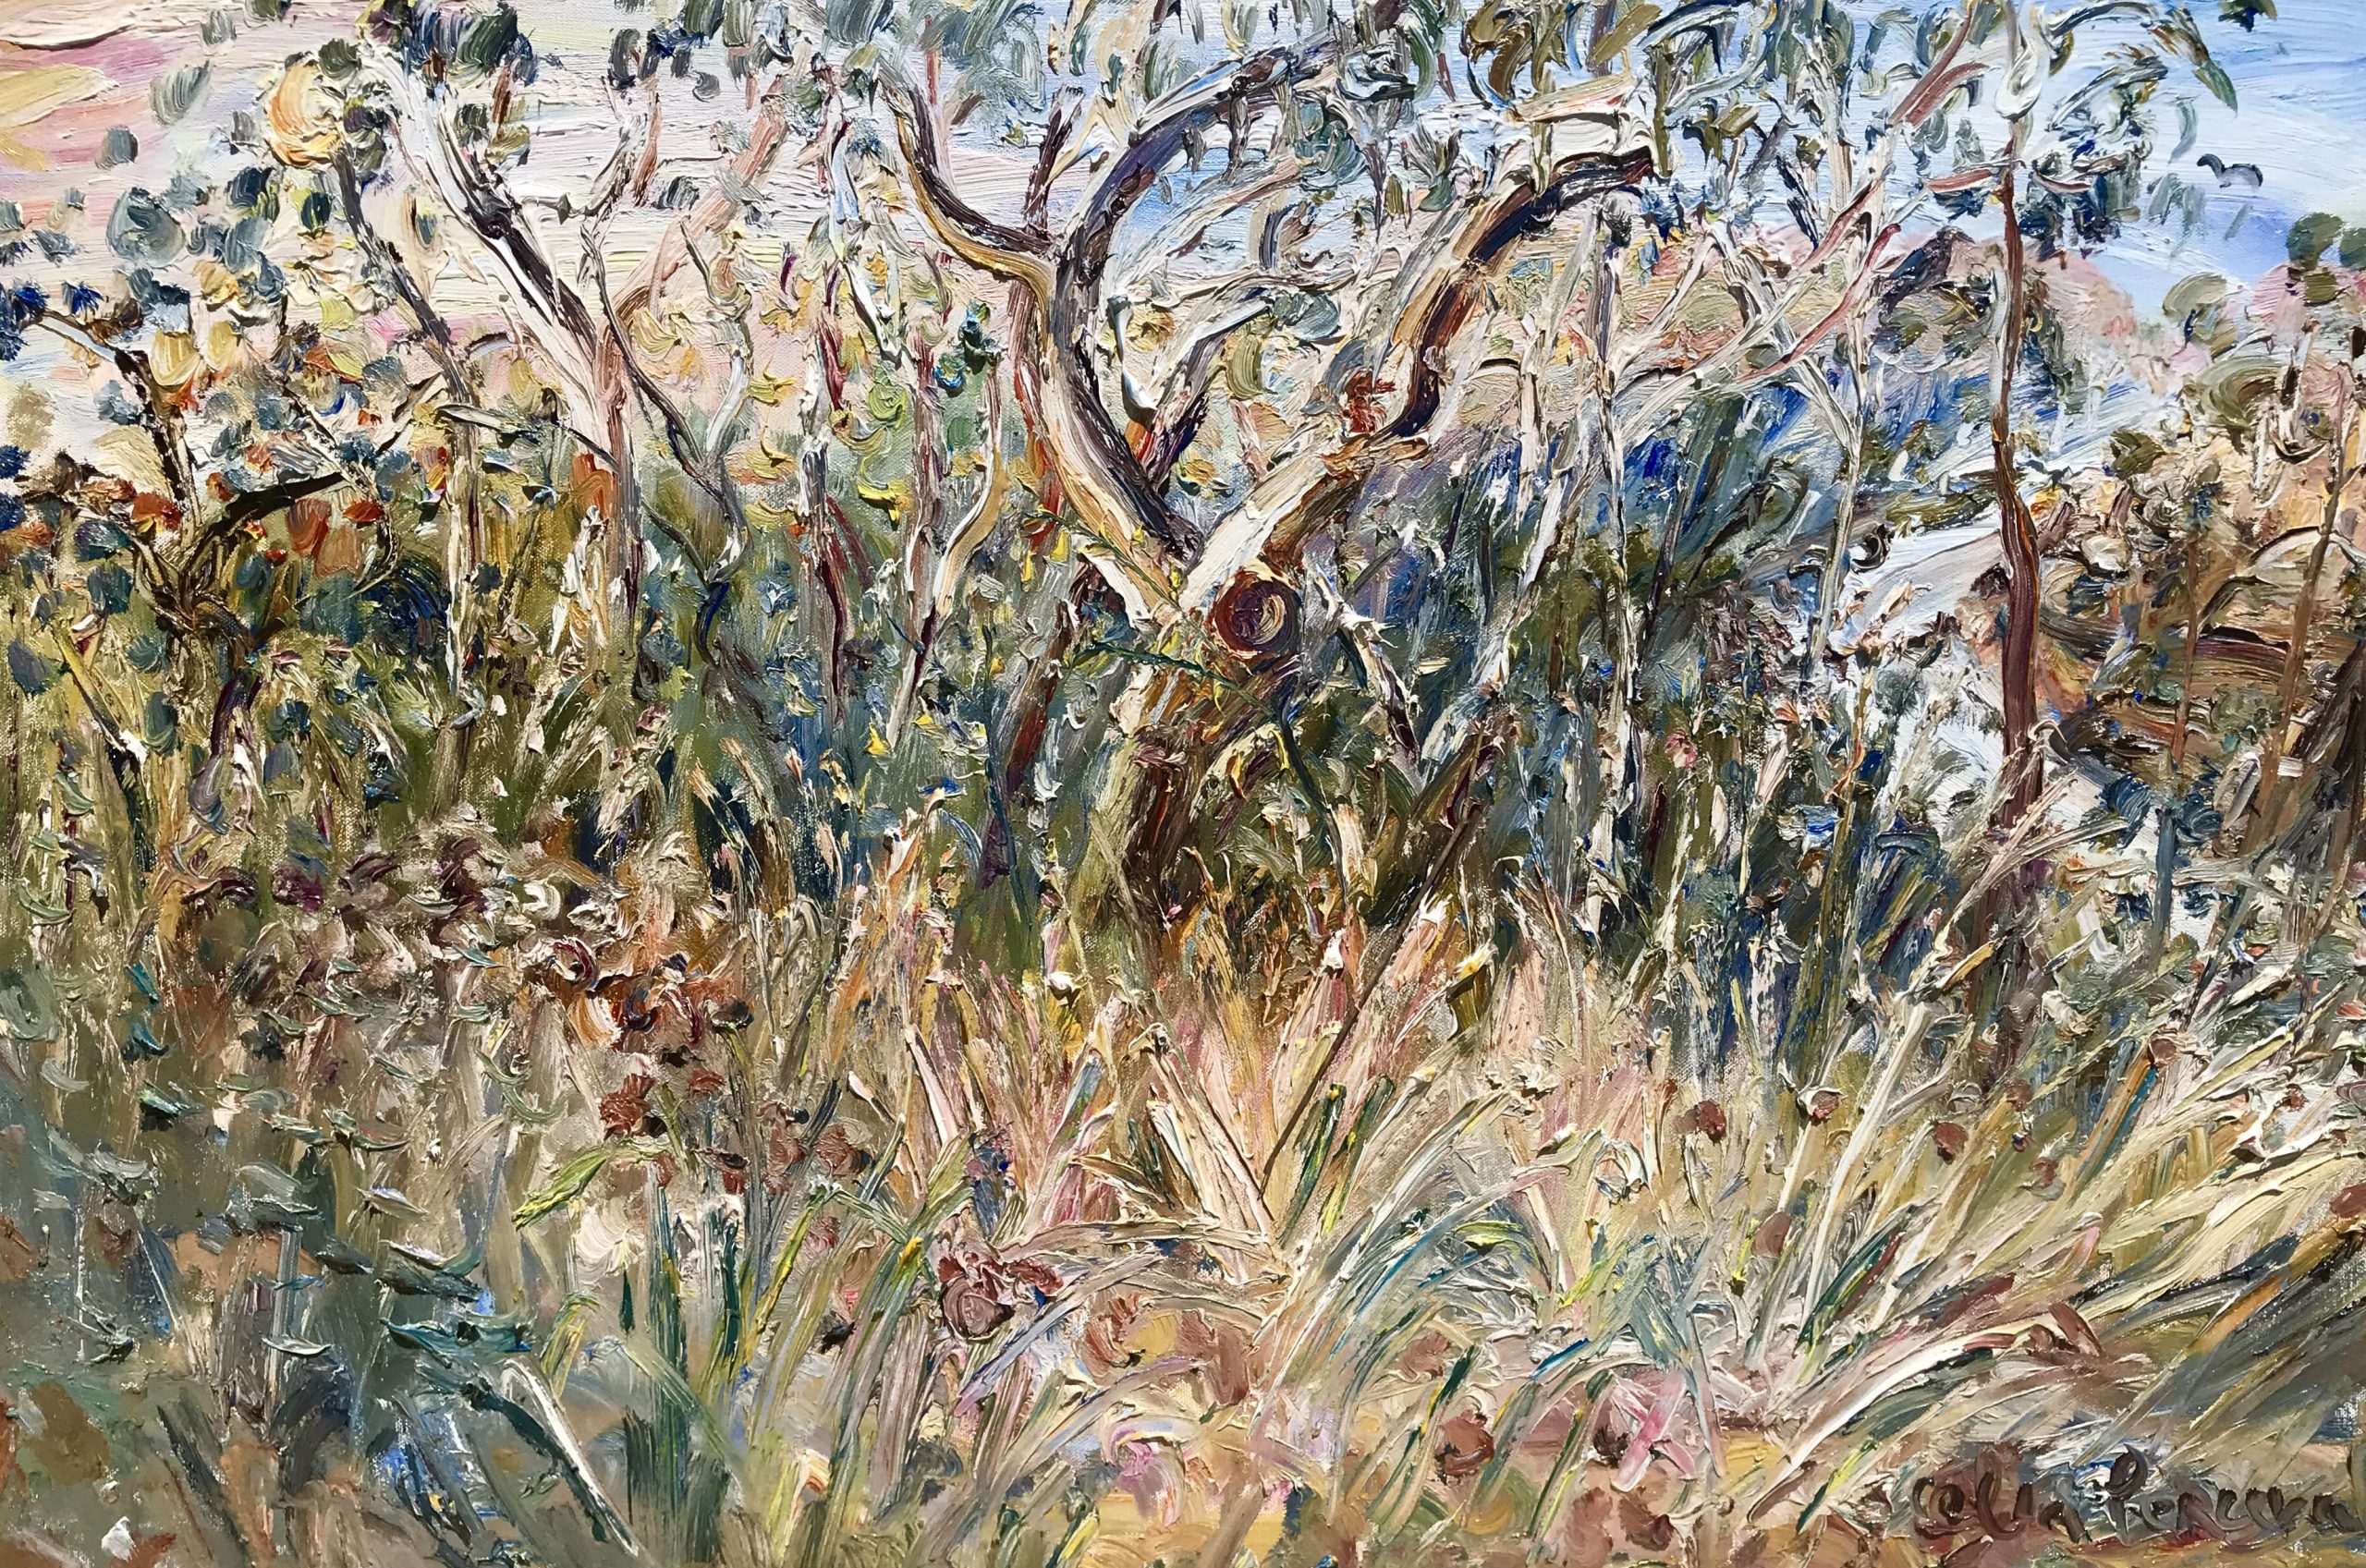 Celia Perceval 'Currawongs above the Shoalhaven' oil on canvas 61 x 92cm $13,000